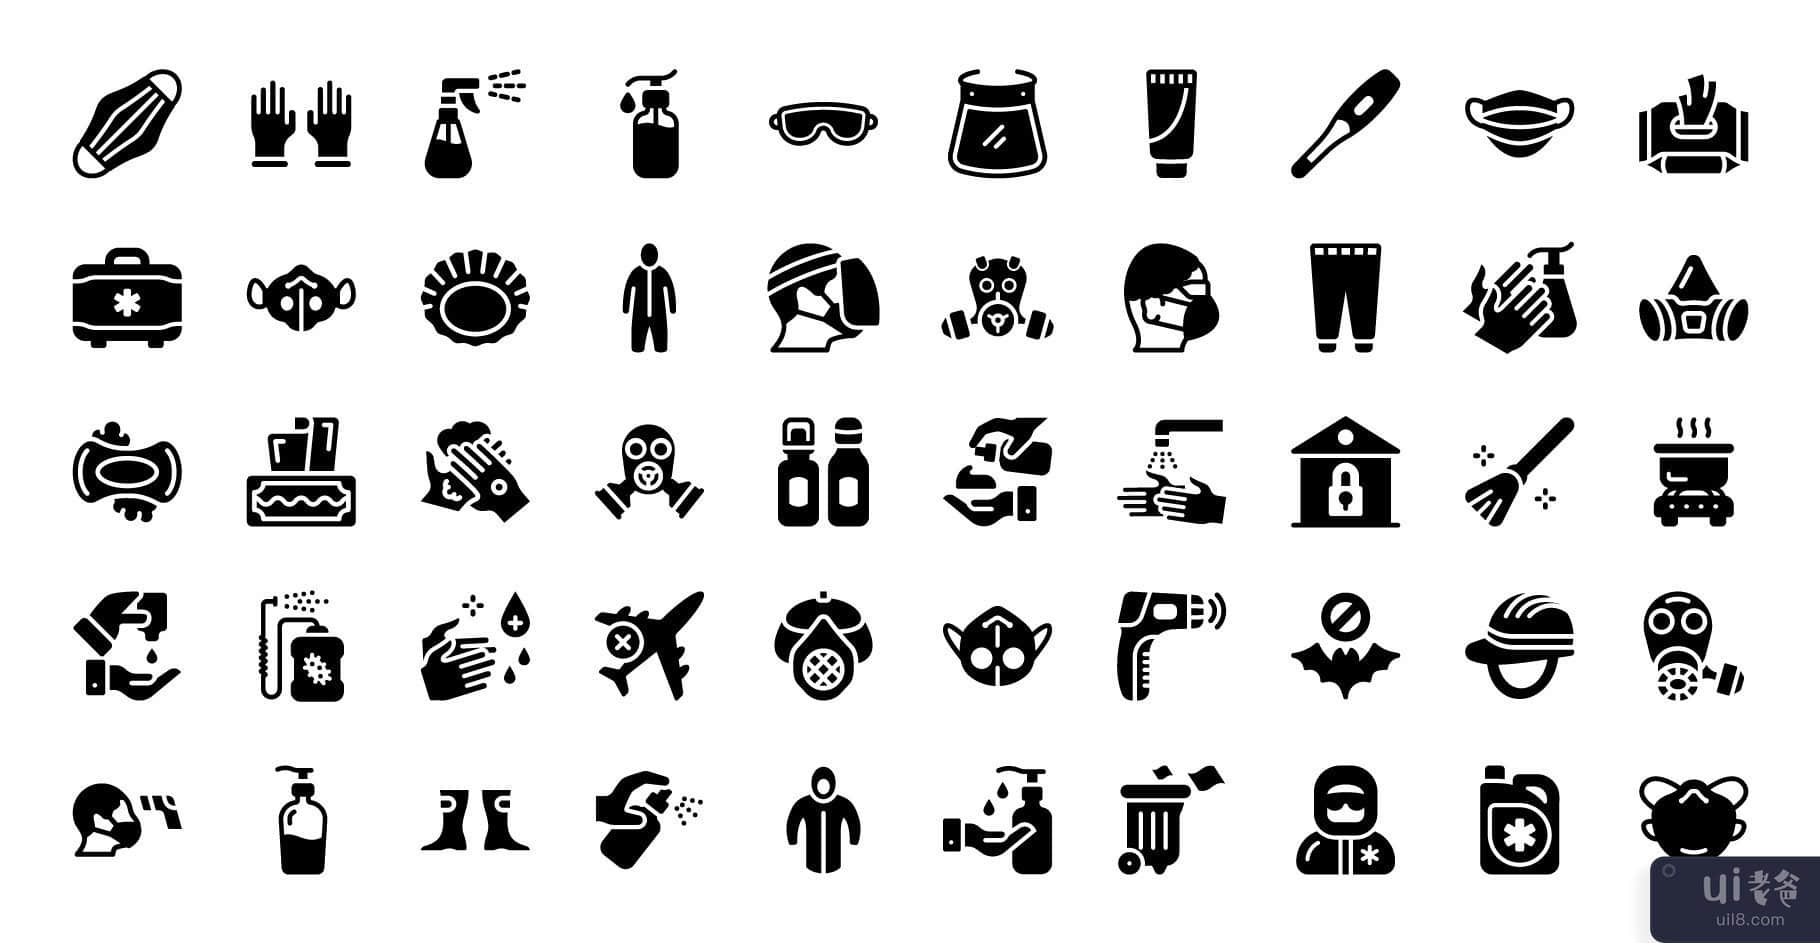 Covid 预防设备线性图标(Covid Prevention Equipments Linear Icons)插图2